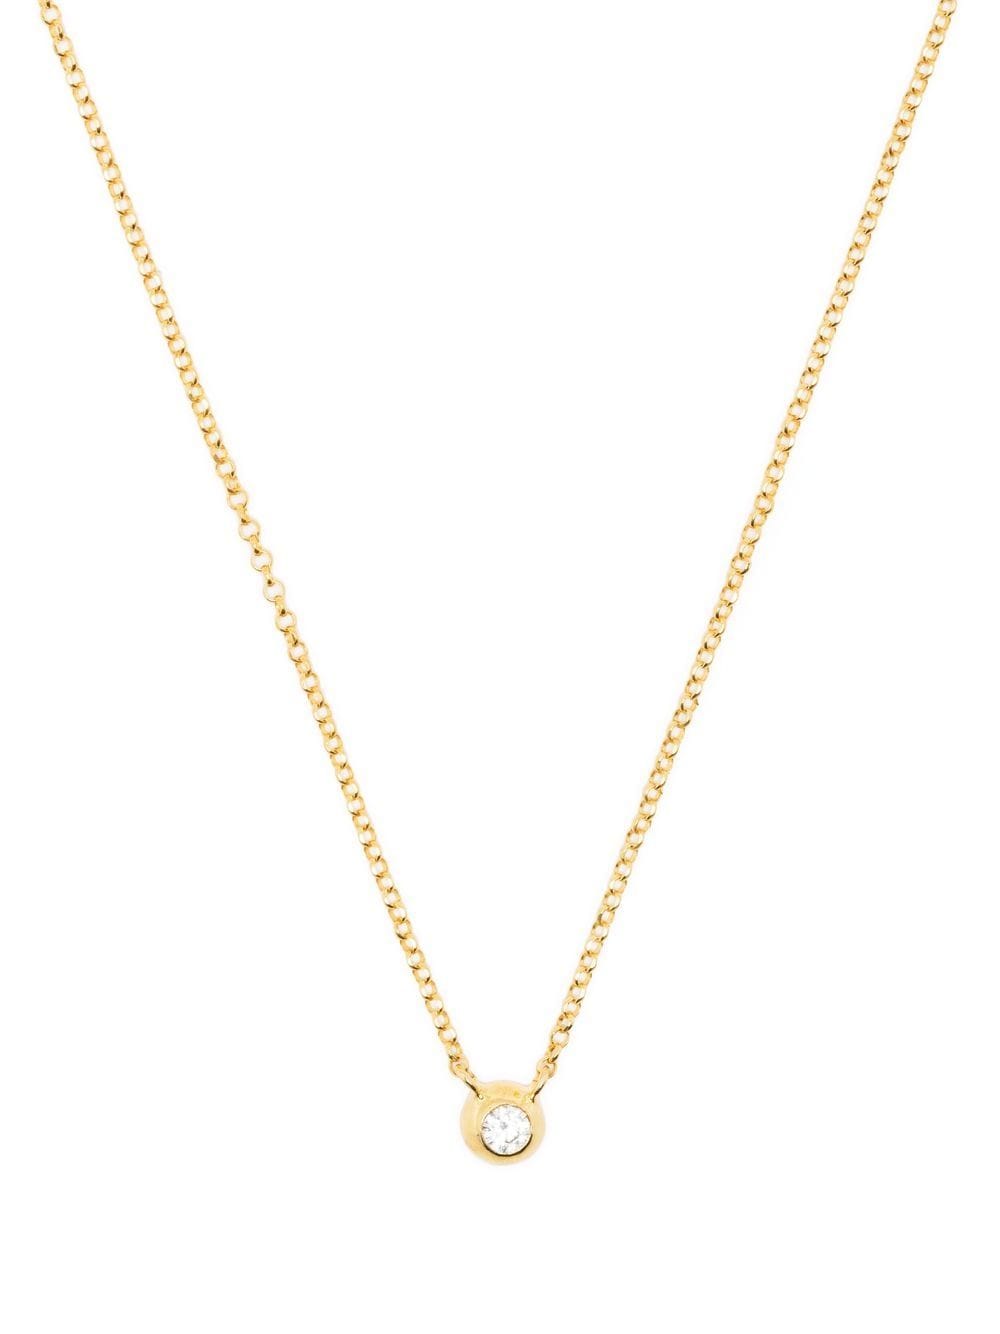 Audacious gold-plated necklace